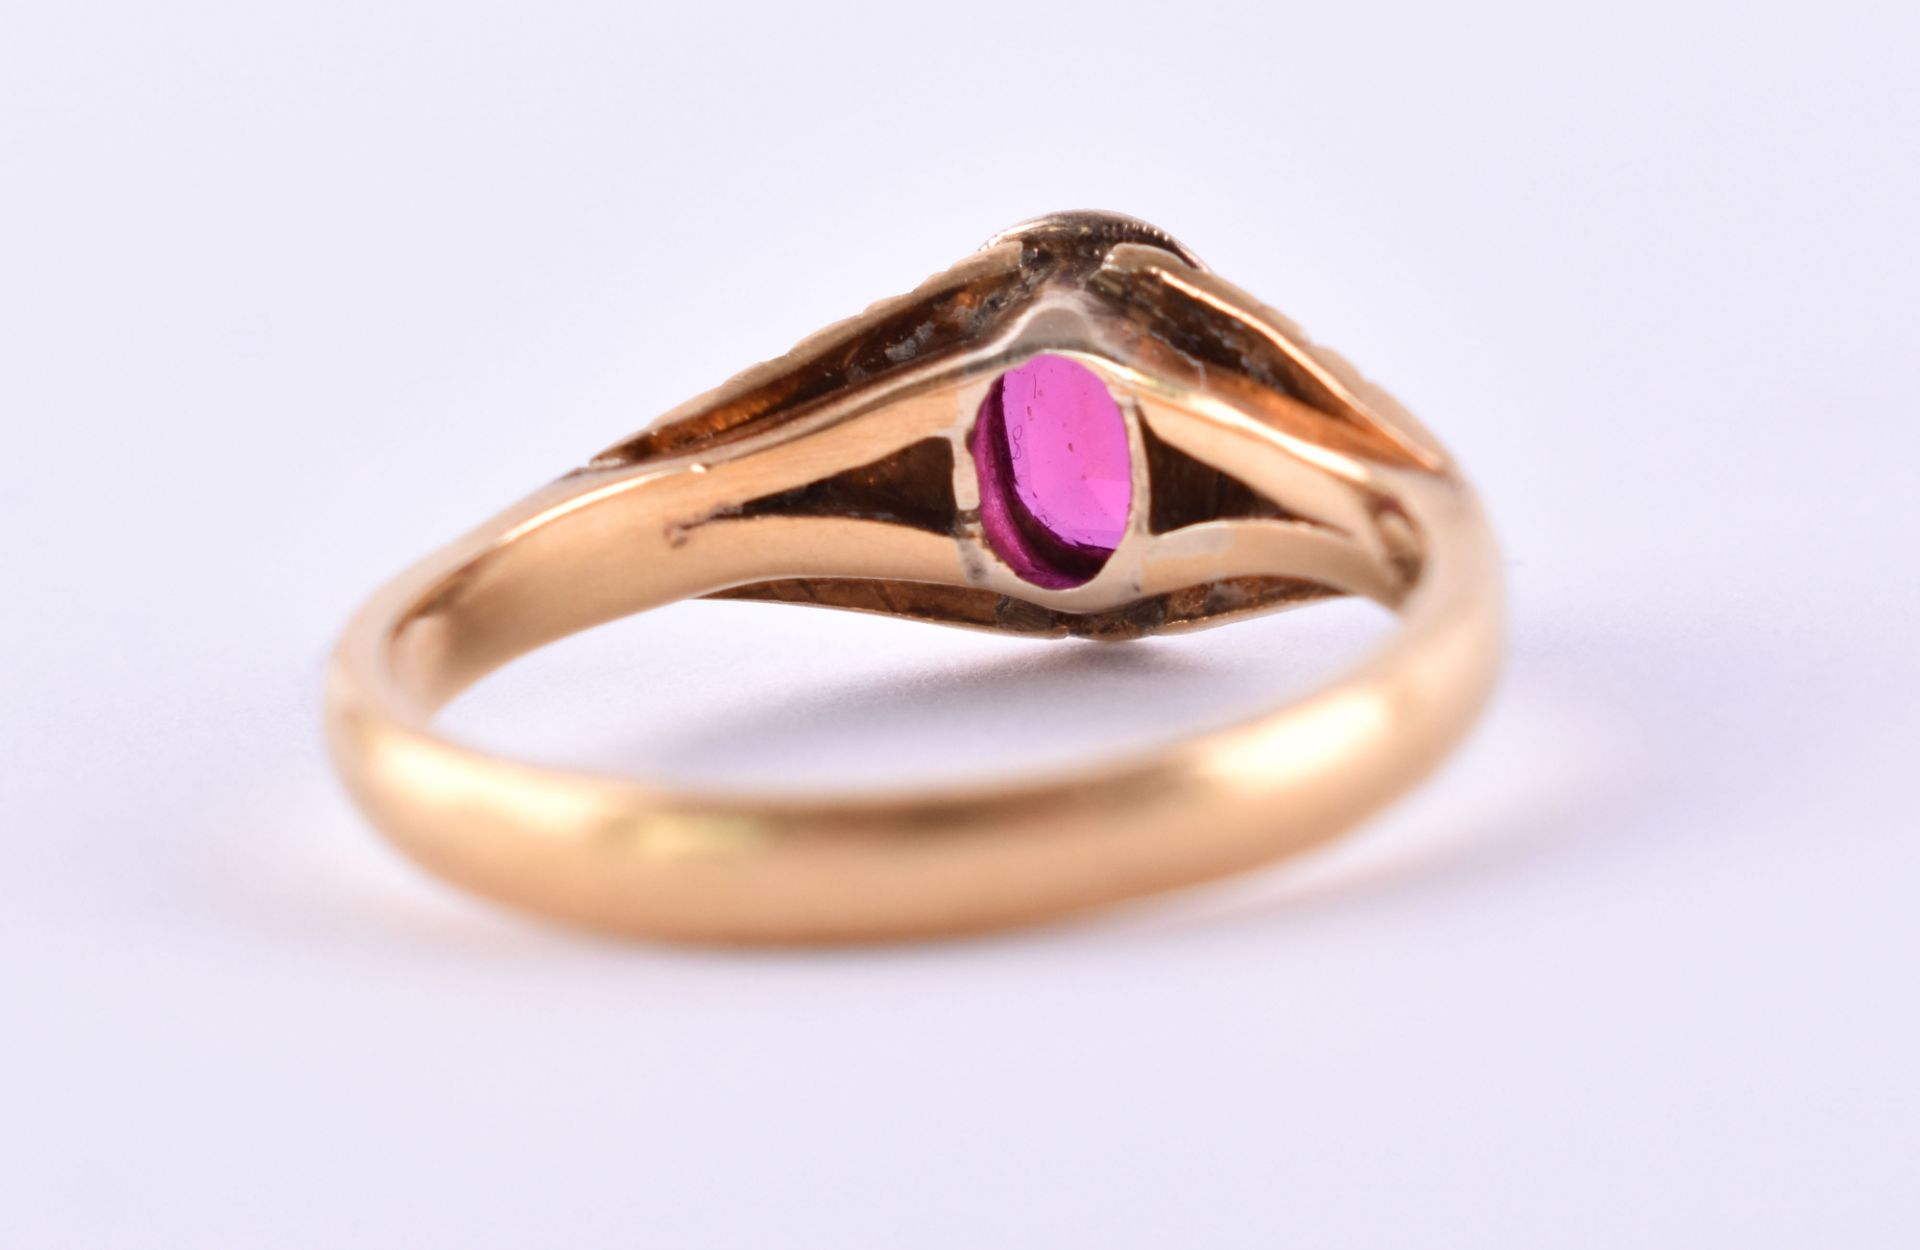 Ruby ring - Image 3 of 4